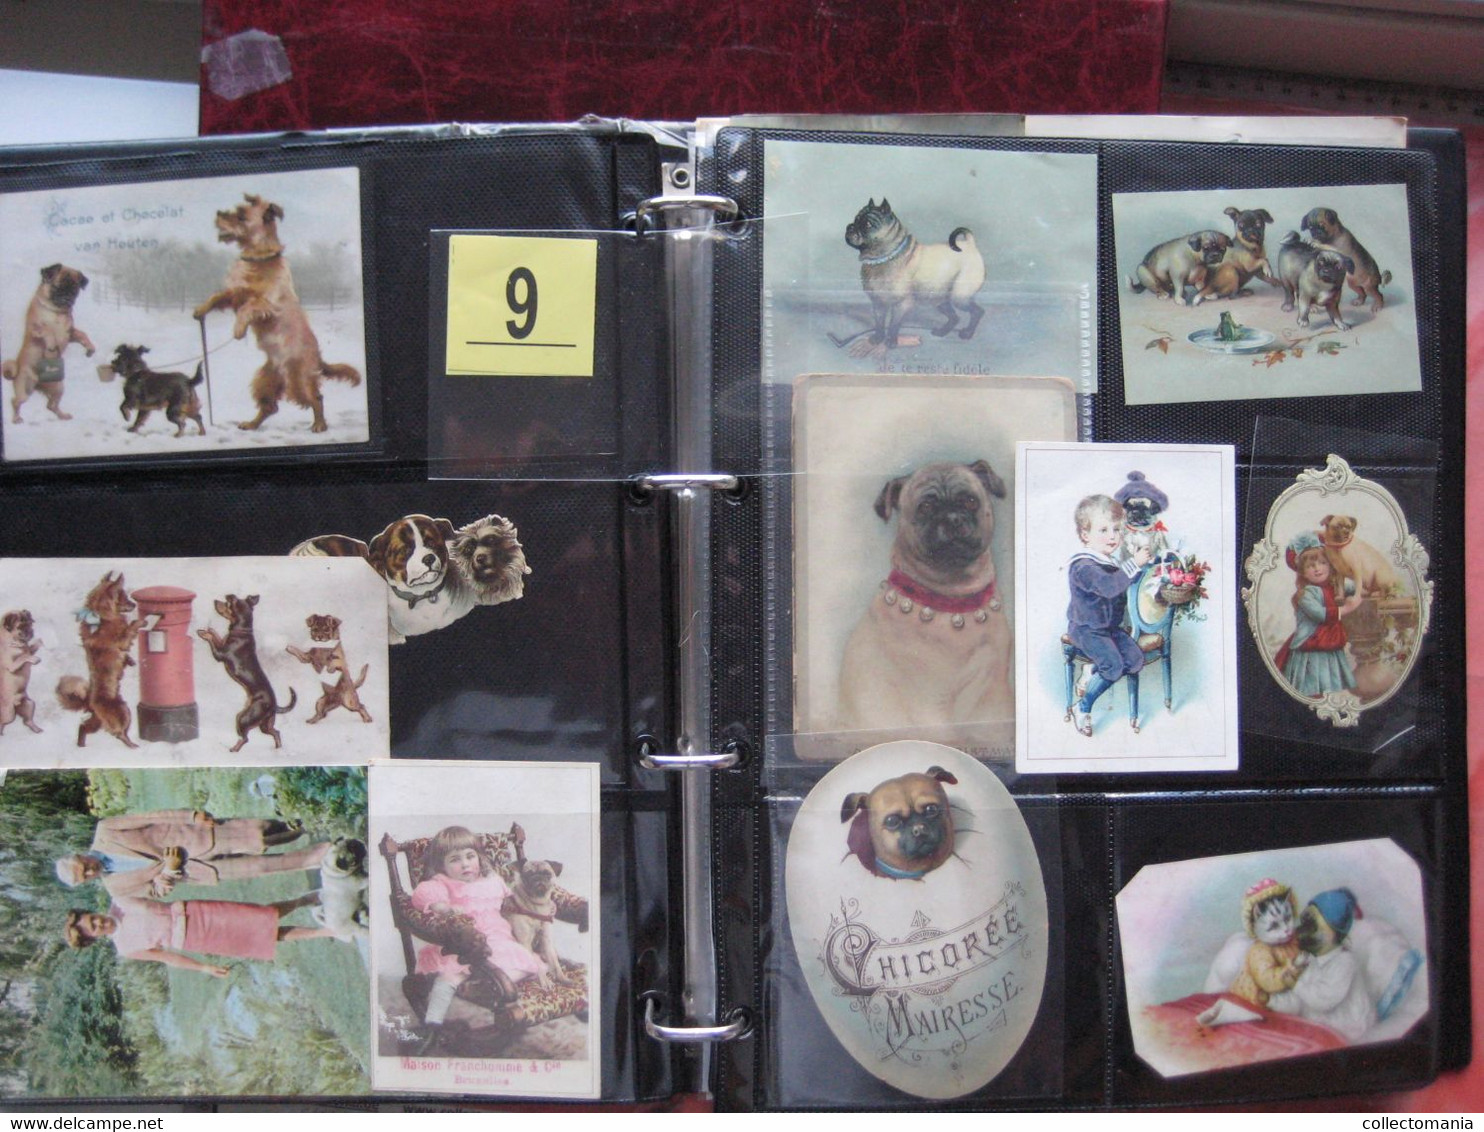 19th century each chromo fotograped (count yourself ) SCRAPS_MAP11_dogs, Mops,Teckel,Windhond GLANS BILDER